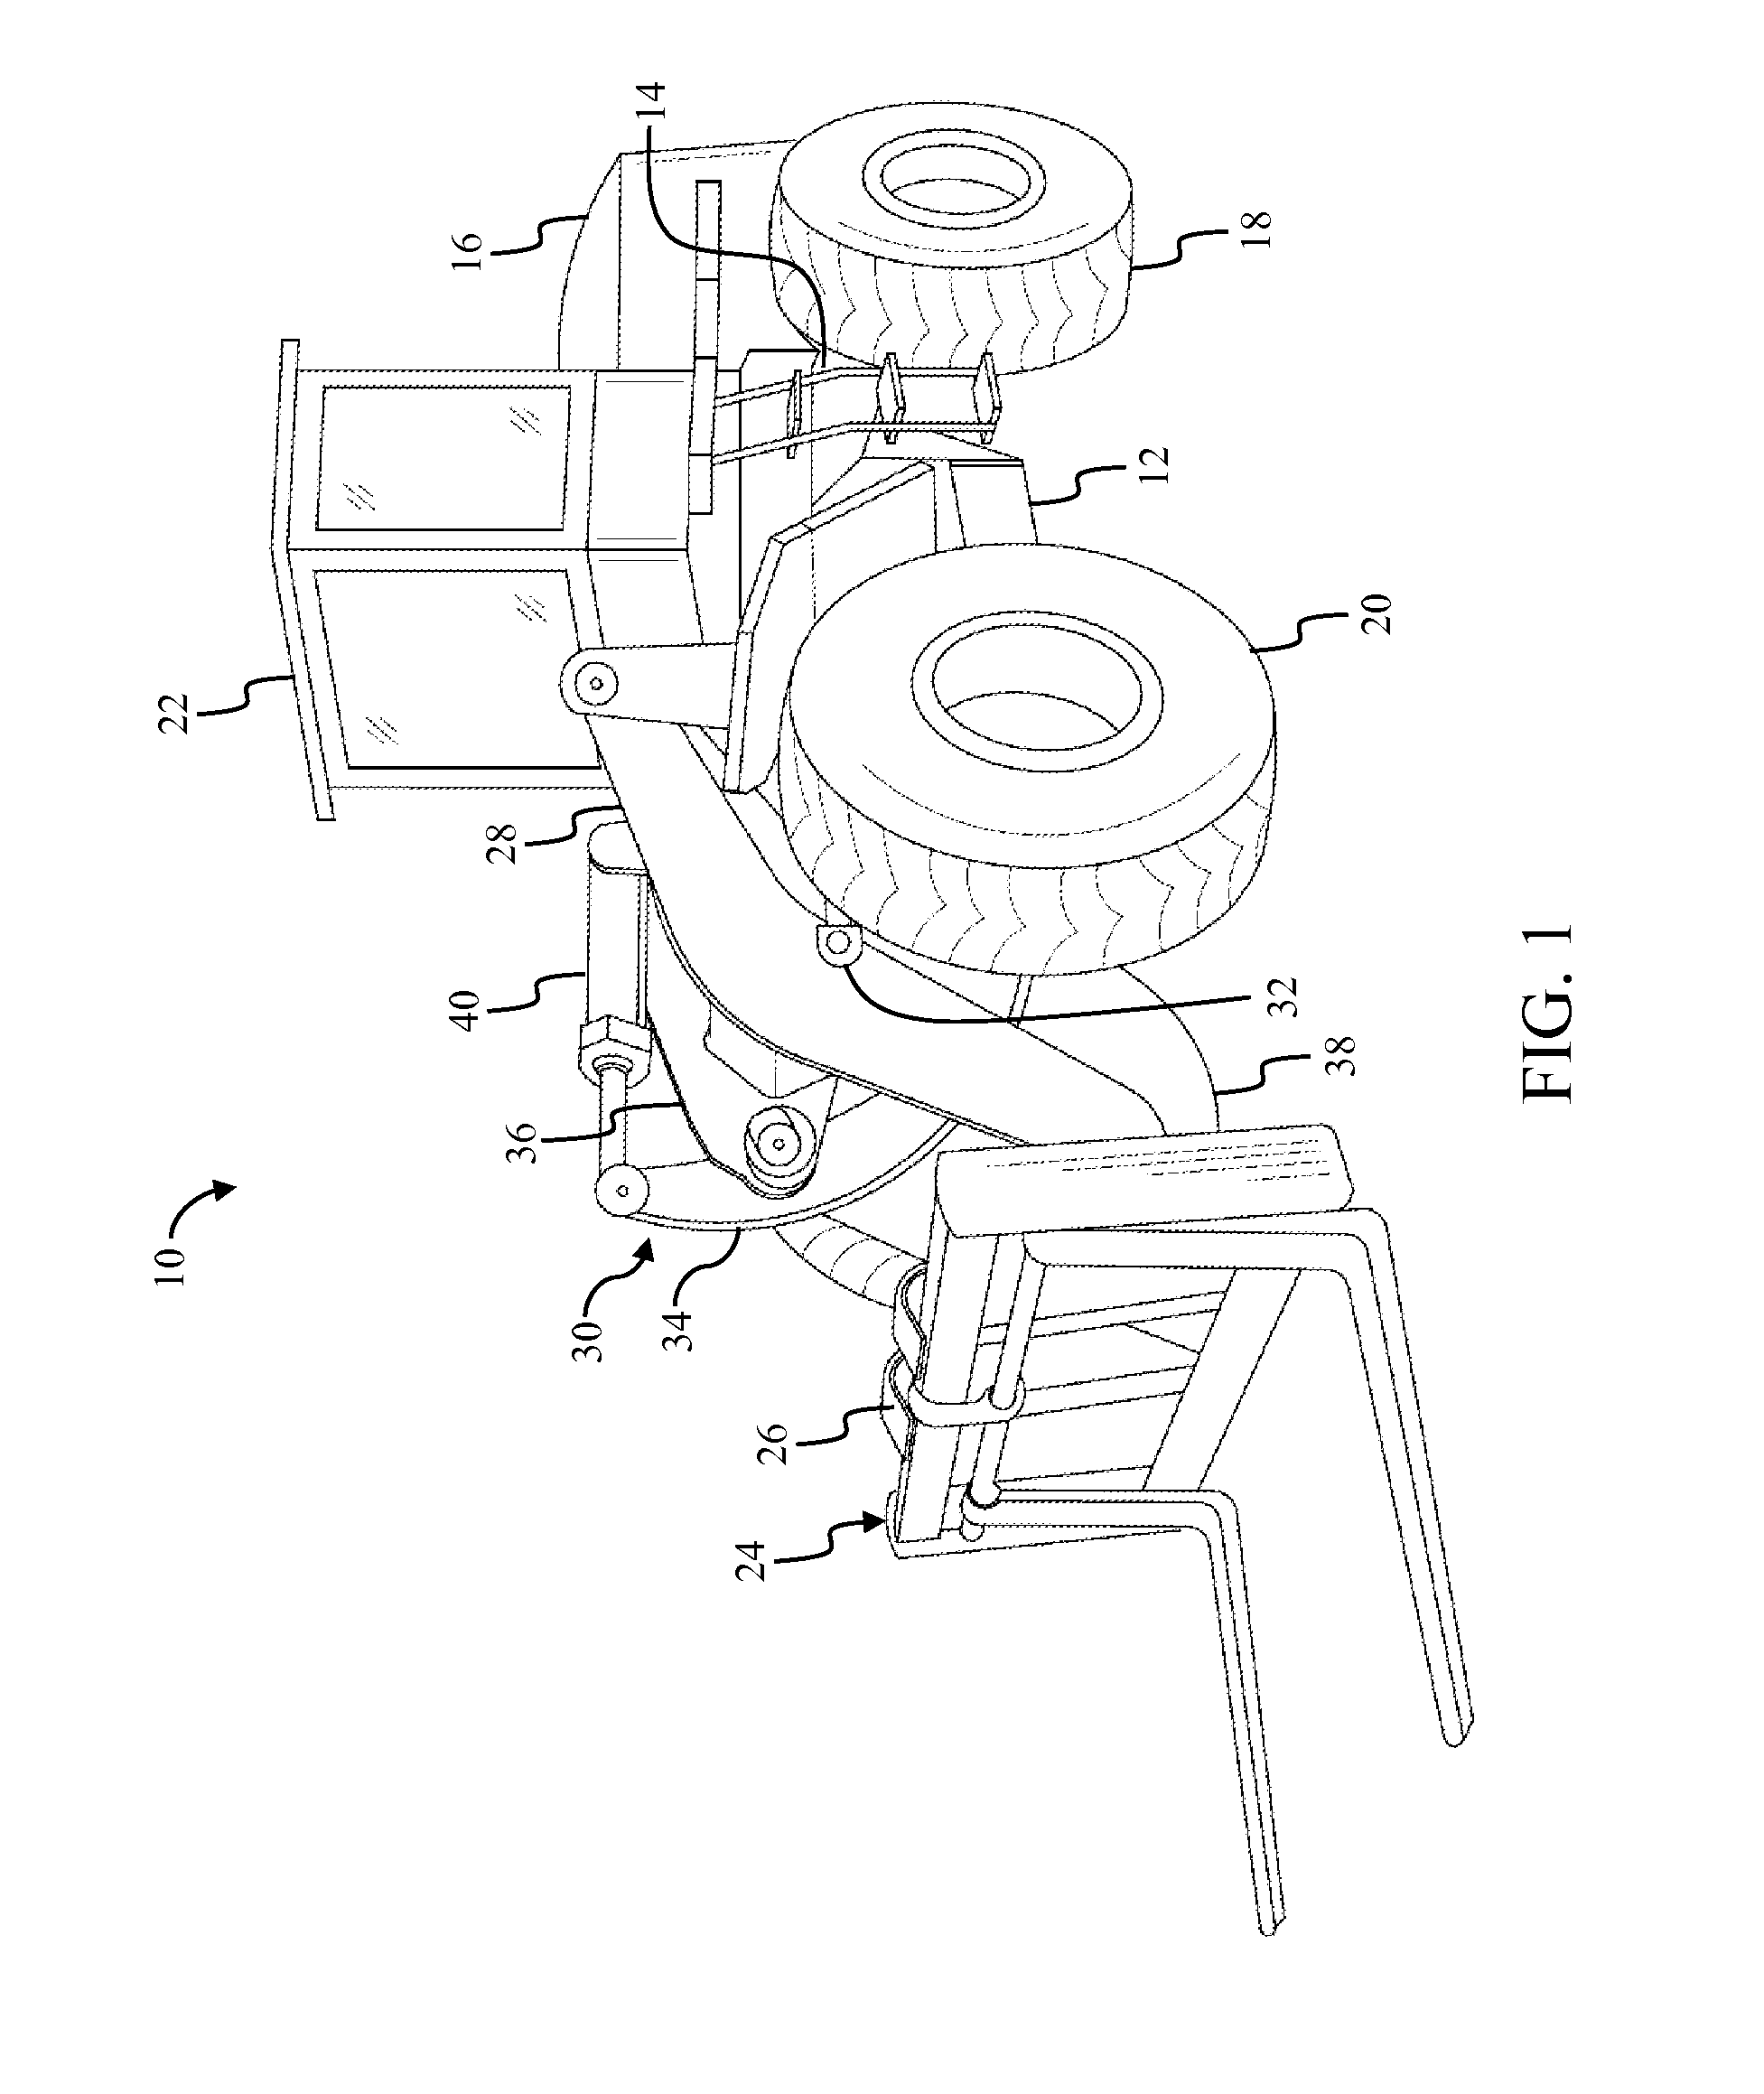 Fork assembly for lifting machines with interlocking tines